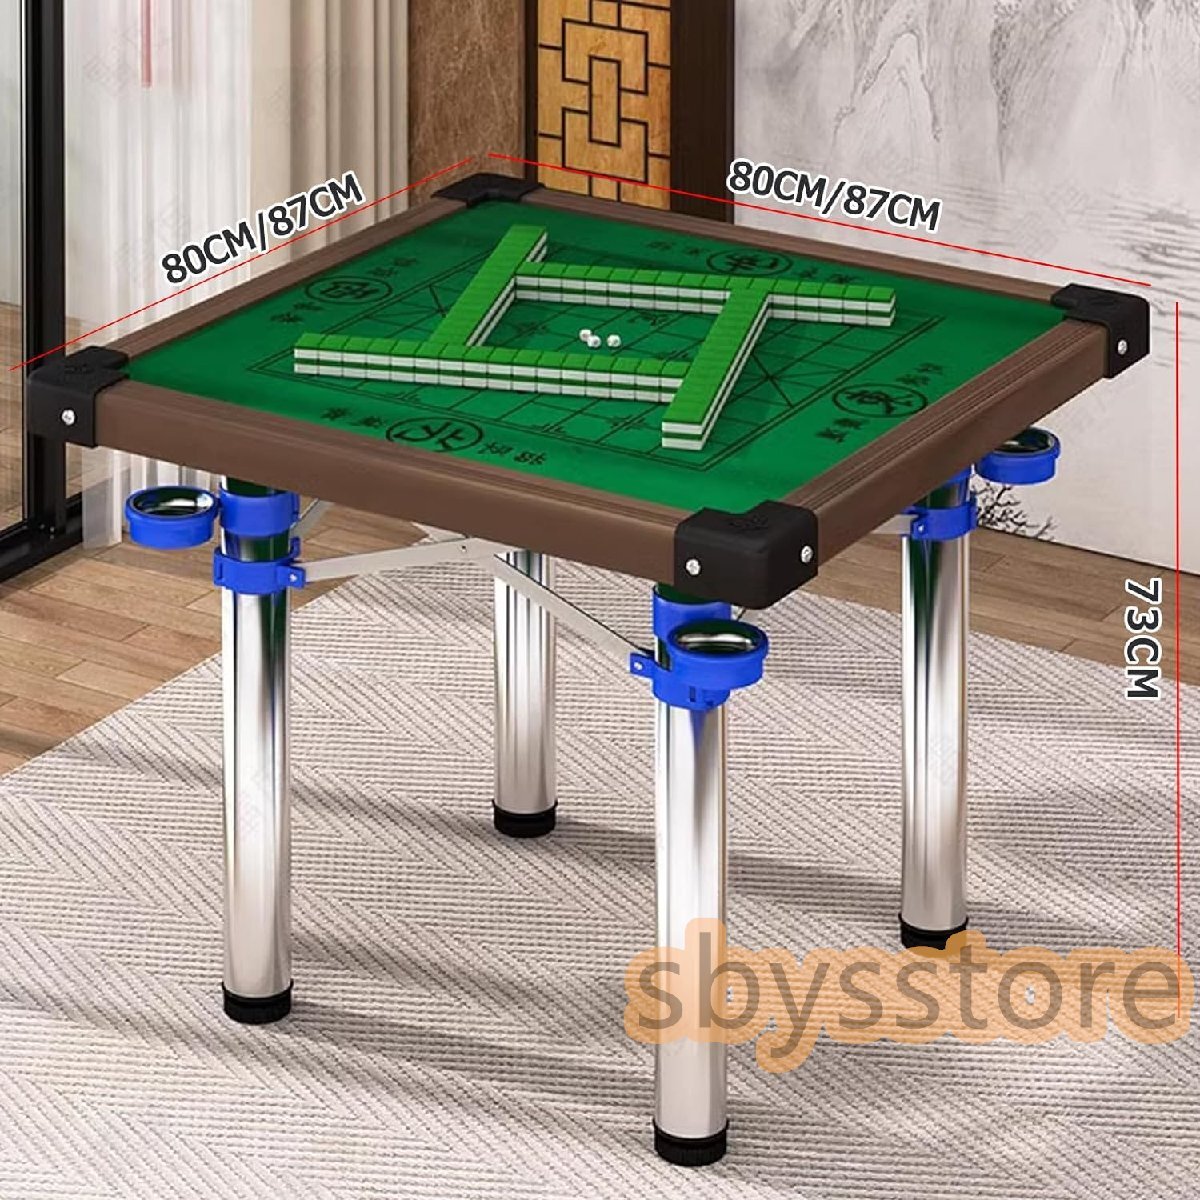  mah-jong table folding type multifunction home use hand loading mahjong table both sides use possibility hand strike . for . table silencing effect quiet sound mobile convenience 80CM*80CM B- ashtray attaching 